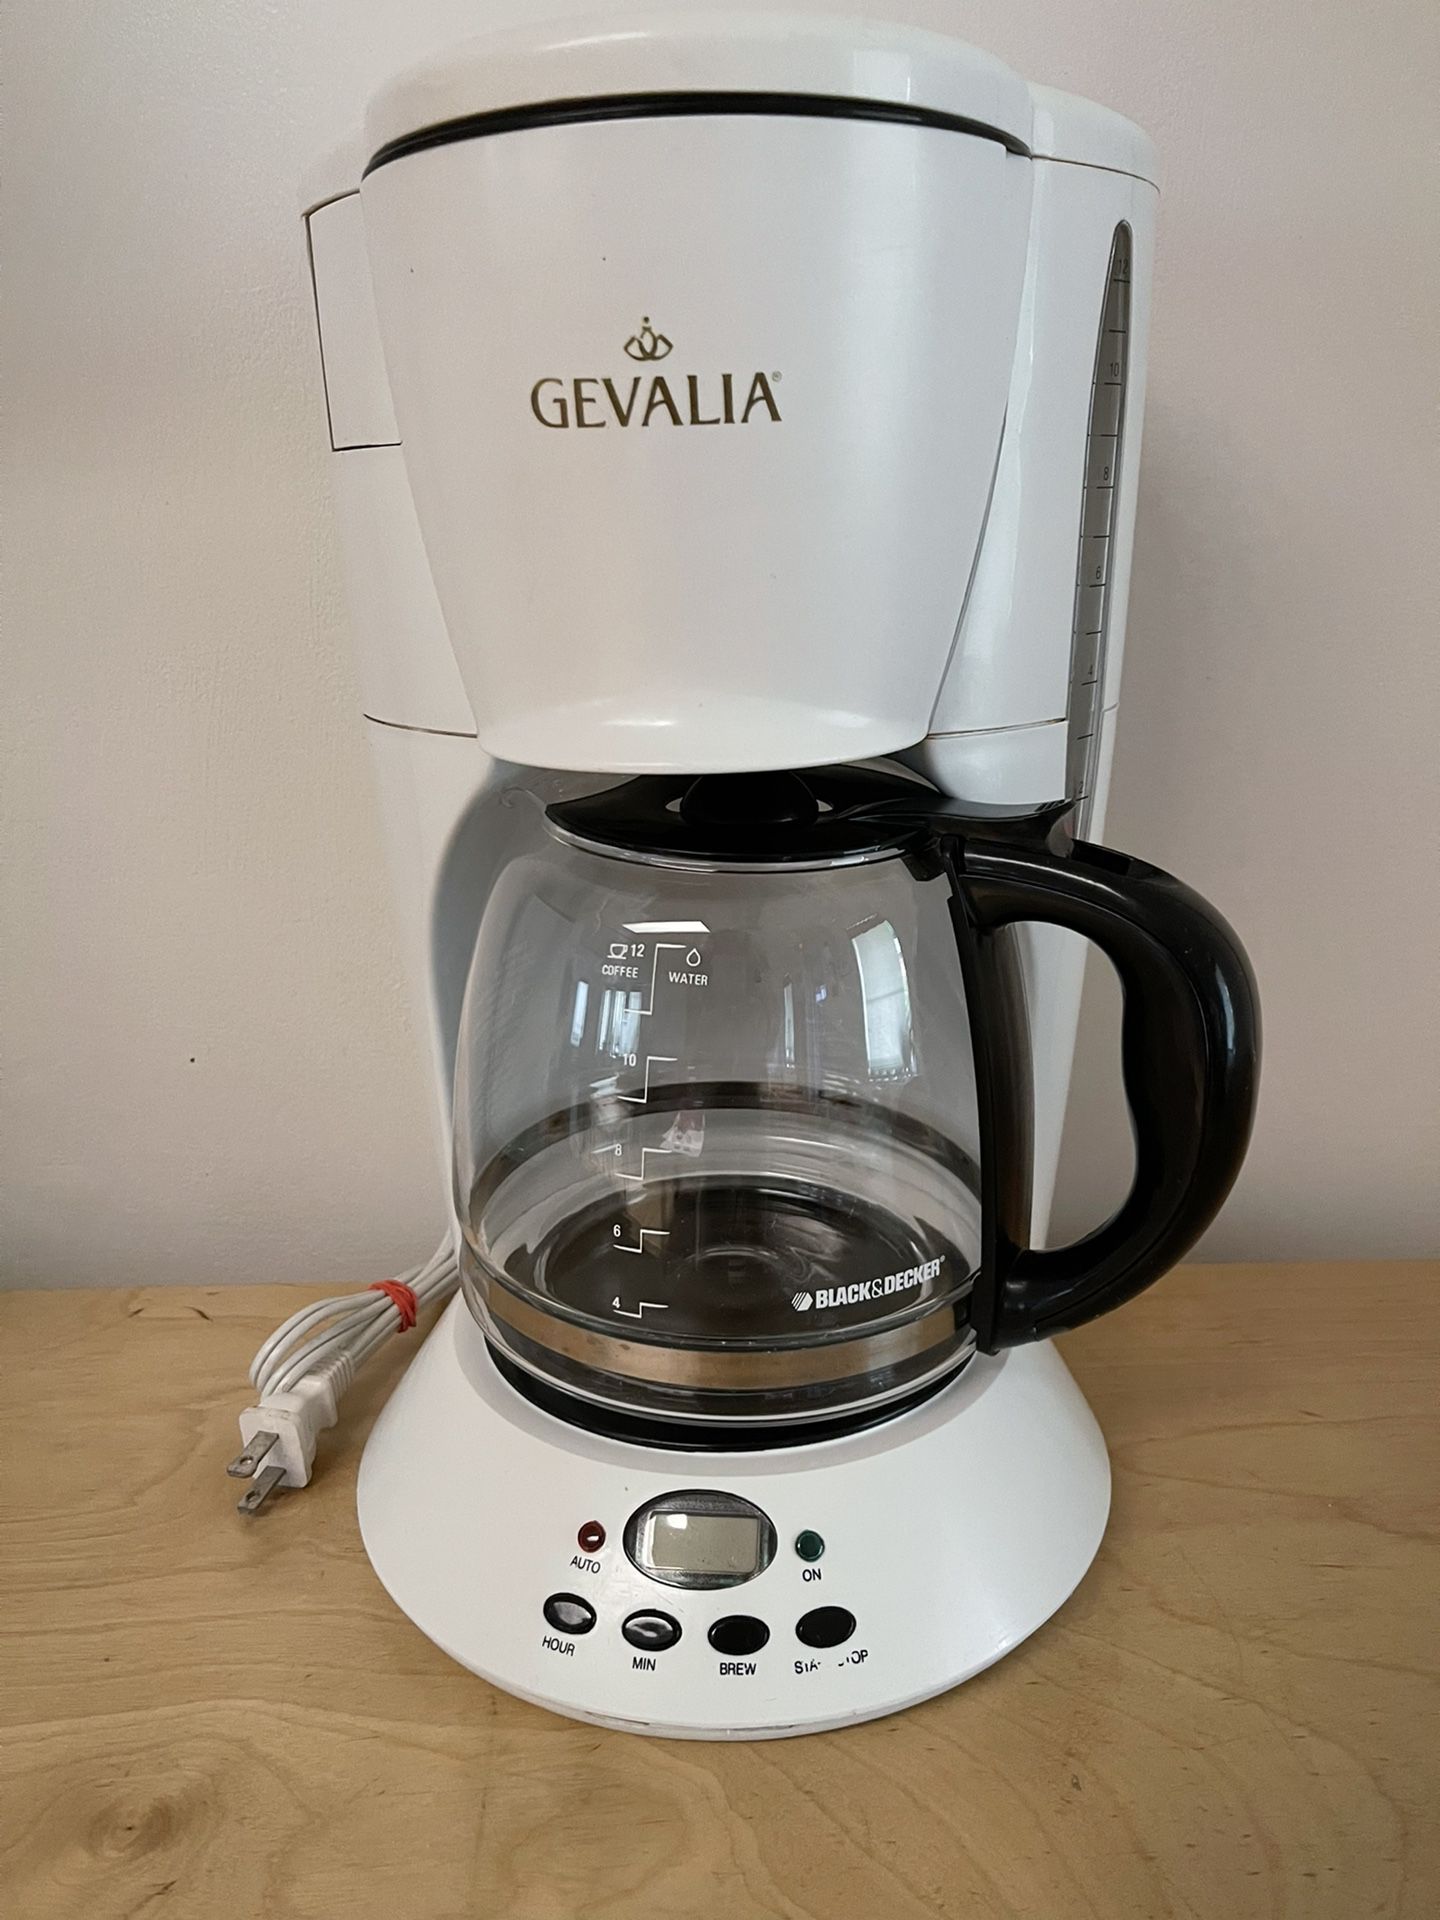 Black & Decker GEVALIA 12 Cup Coffee Maker  w/ Gold Lined Removable Coffee Filter 